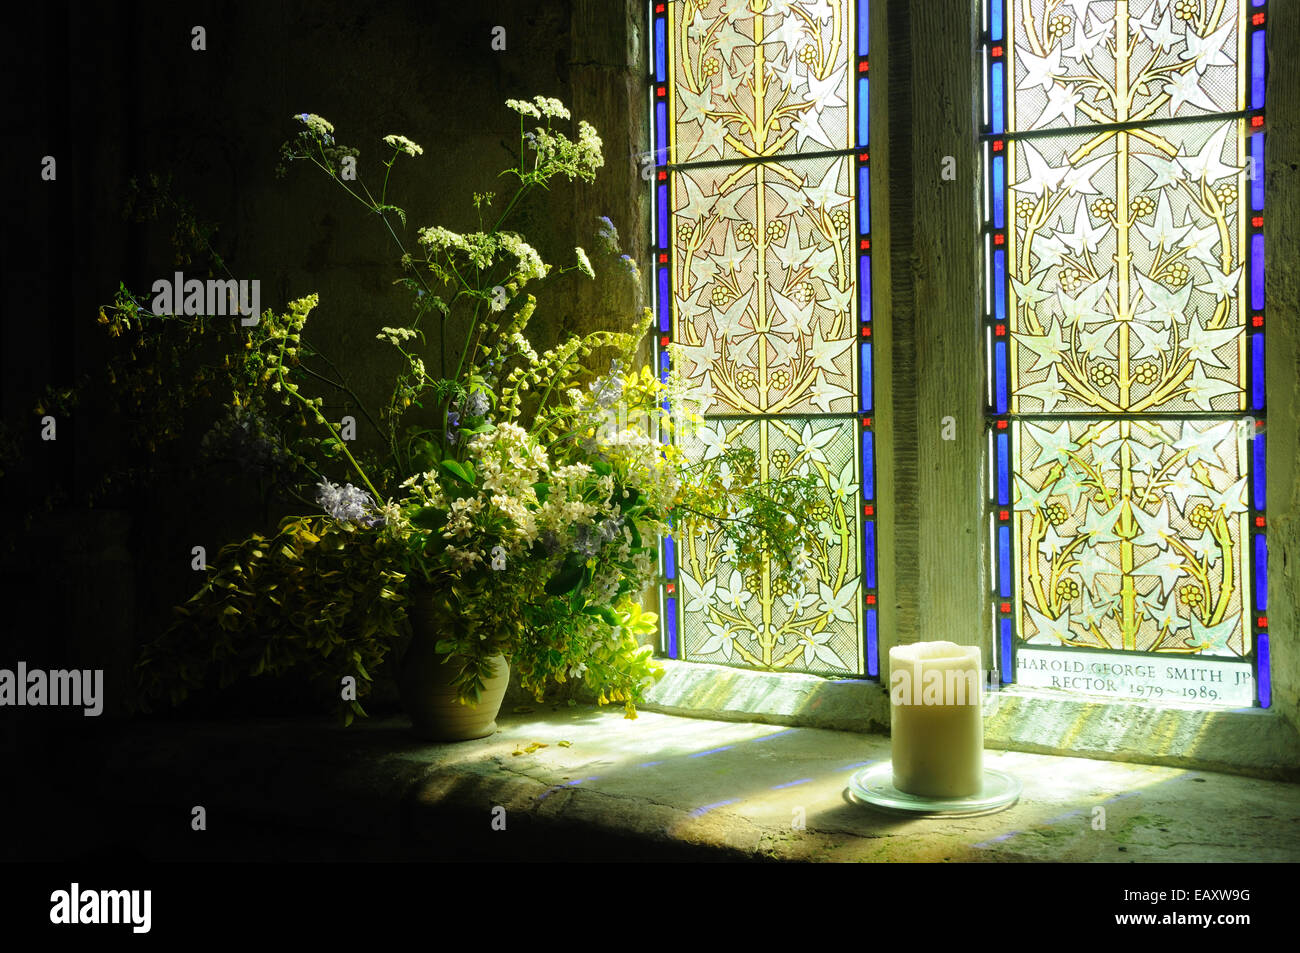 Sunlight through a stained glass window lights a floral display in the Church of St. Peter, Long Bredy, Dorset, England Stock Photo